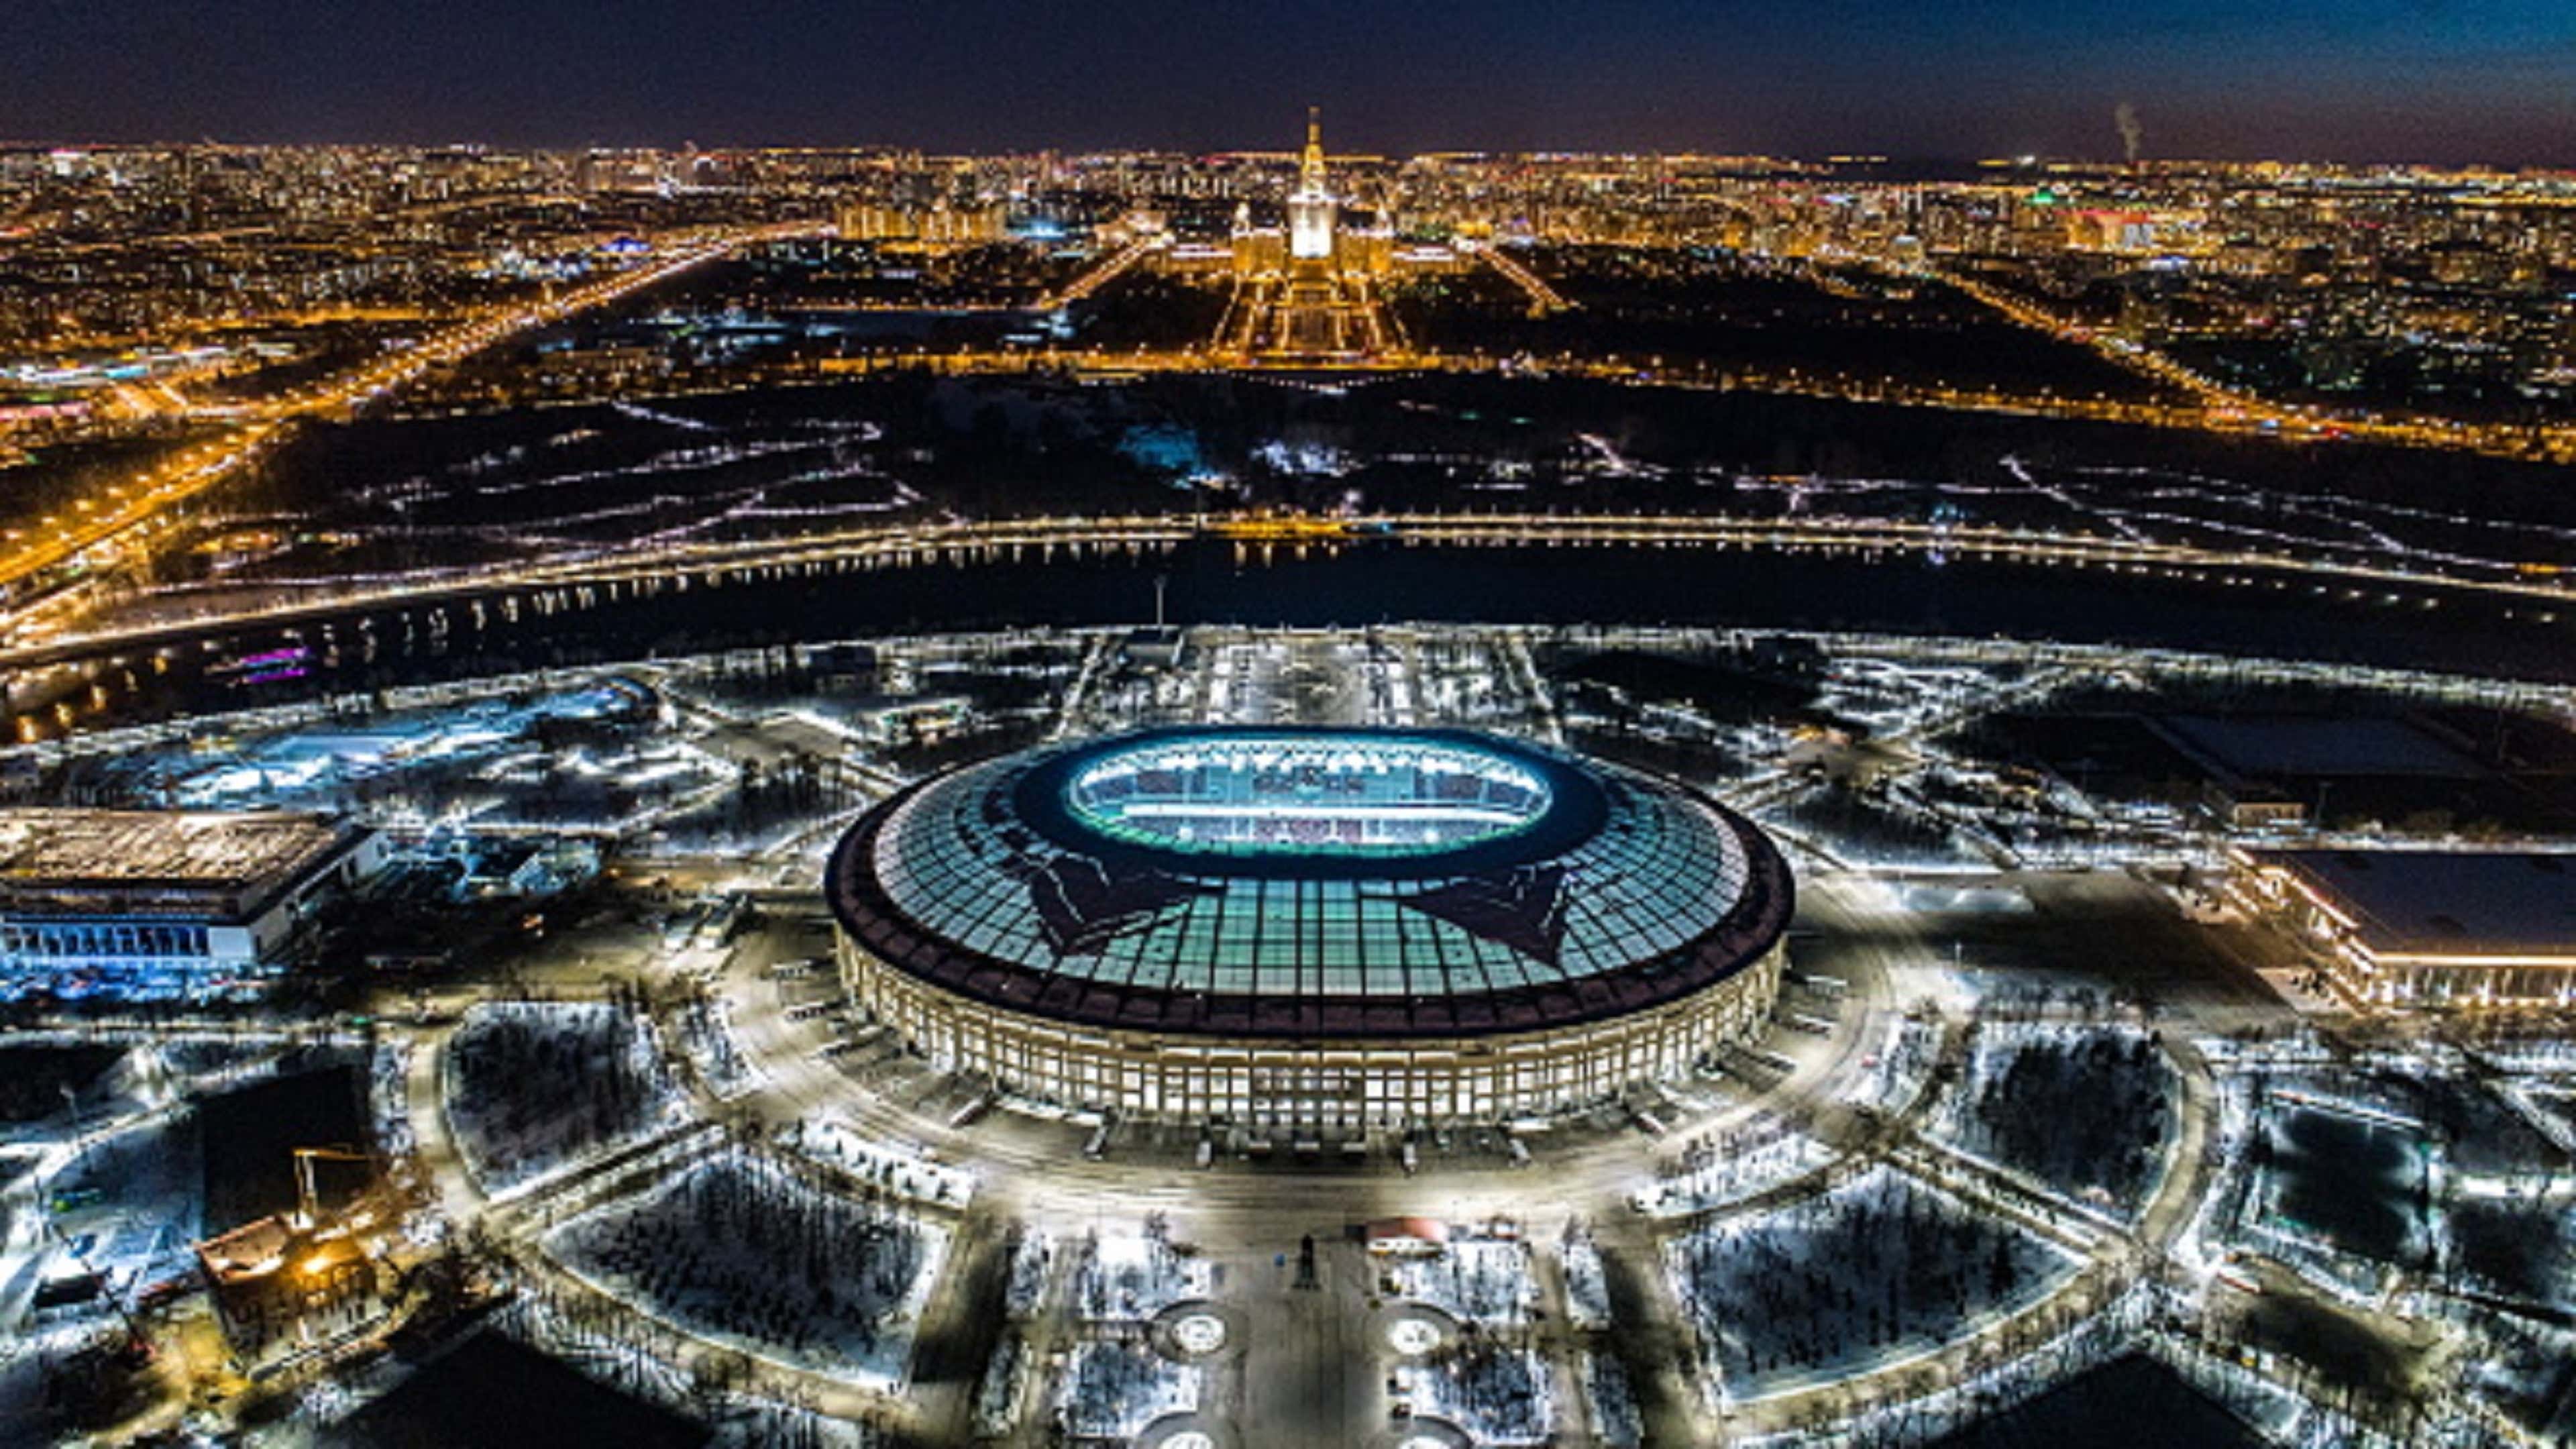 A view of the Luzhniki Stadium before the lights were turned off during the Earth Hour 2018 environmental campaign